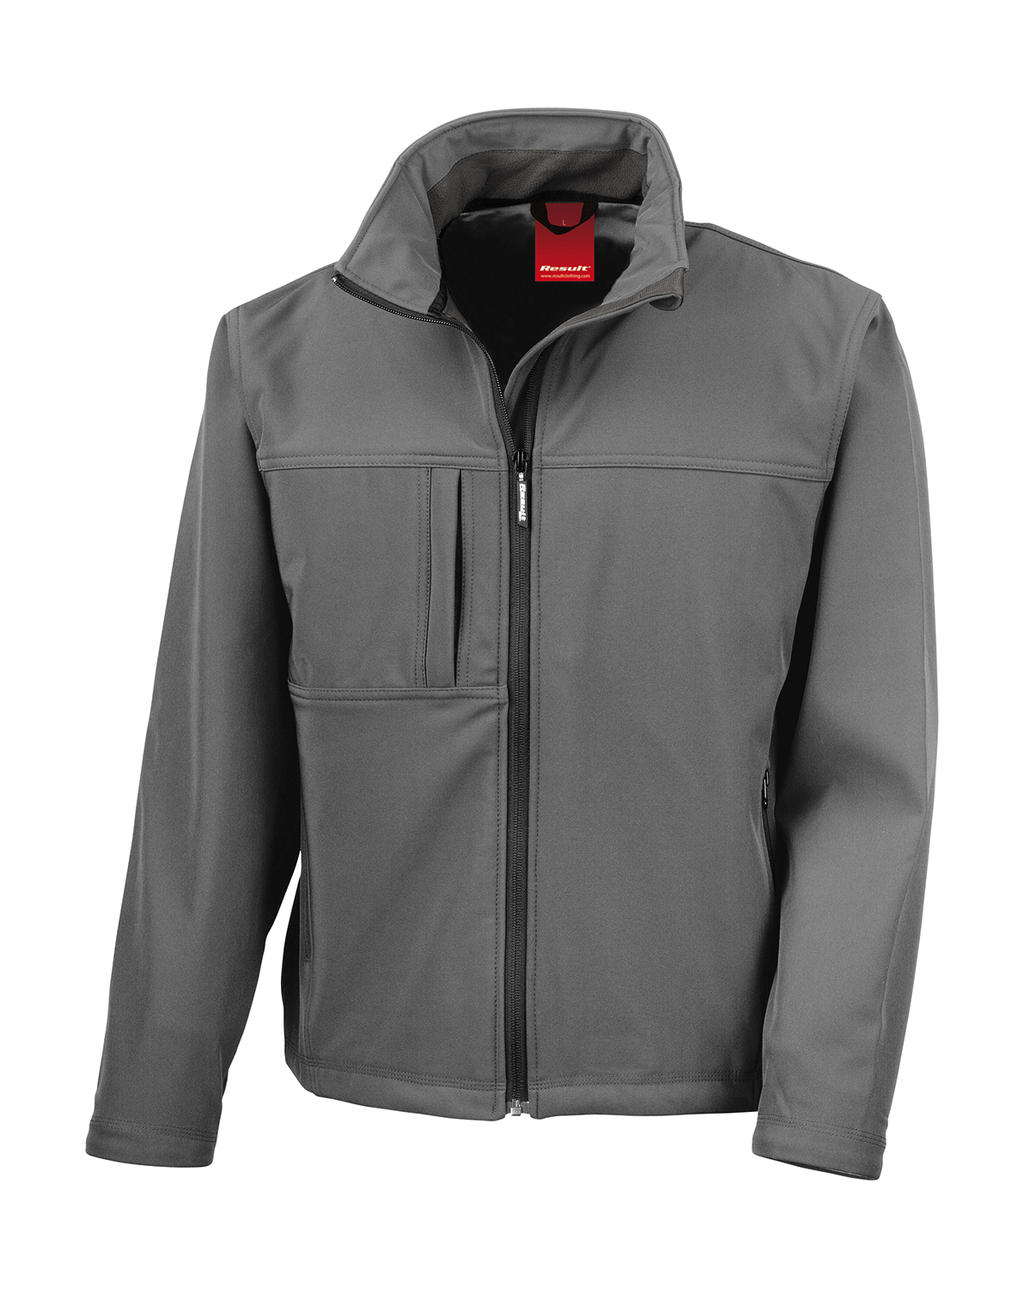  Mens Classic Softshell Jacket in Farbe Workguard Grey